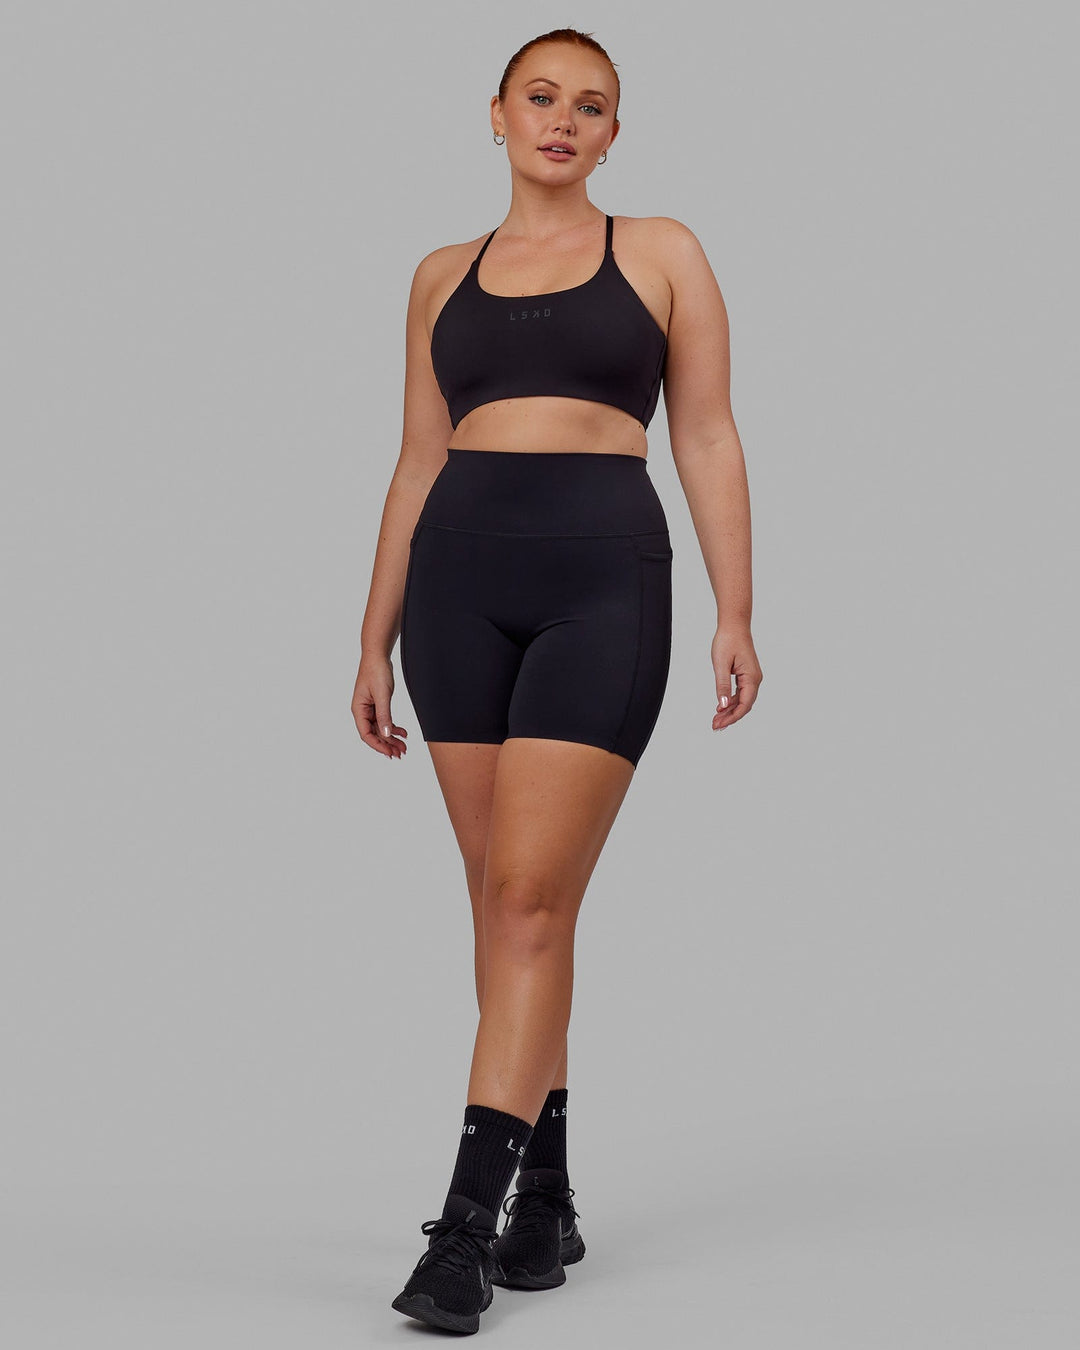 Plus Size Pockets Shorts Tights.